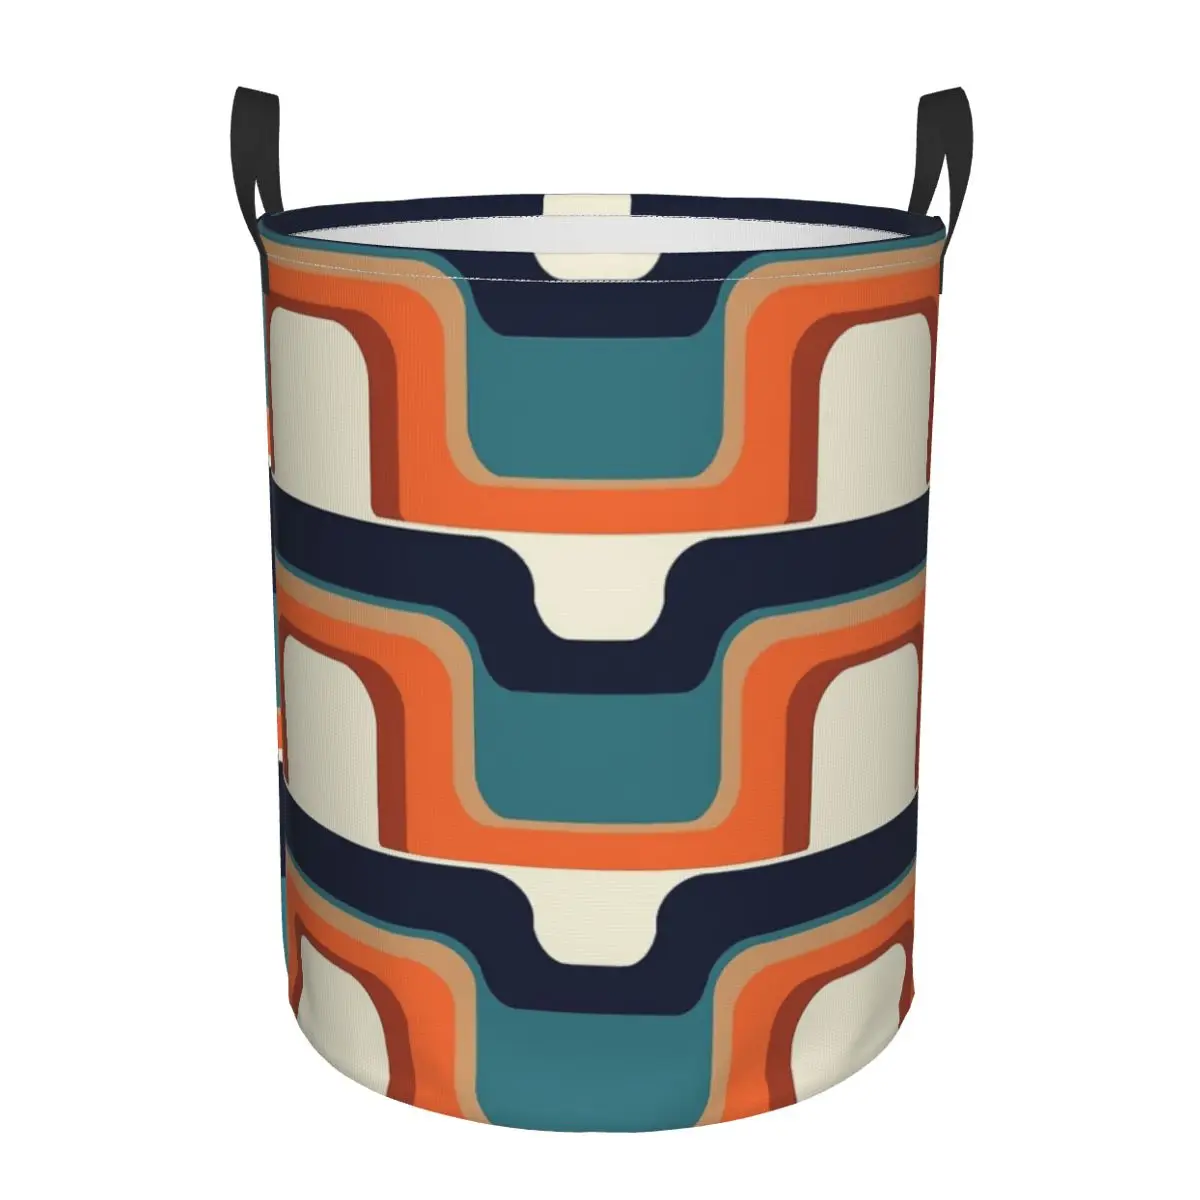 Mid-Century Modern Meets 1970s Orange & Blue Dirty Laundry Baskets Foldable Large Waterproof Clothes Toy Sundries Storage Basket